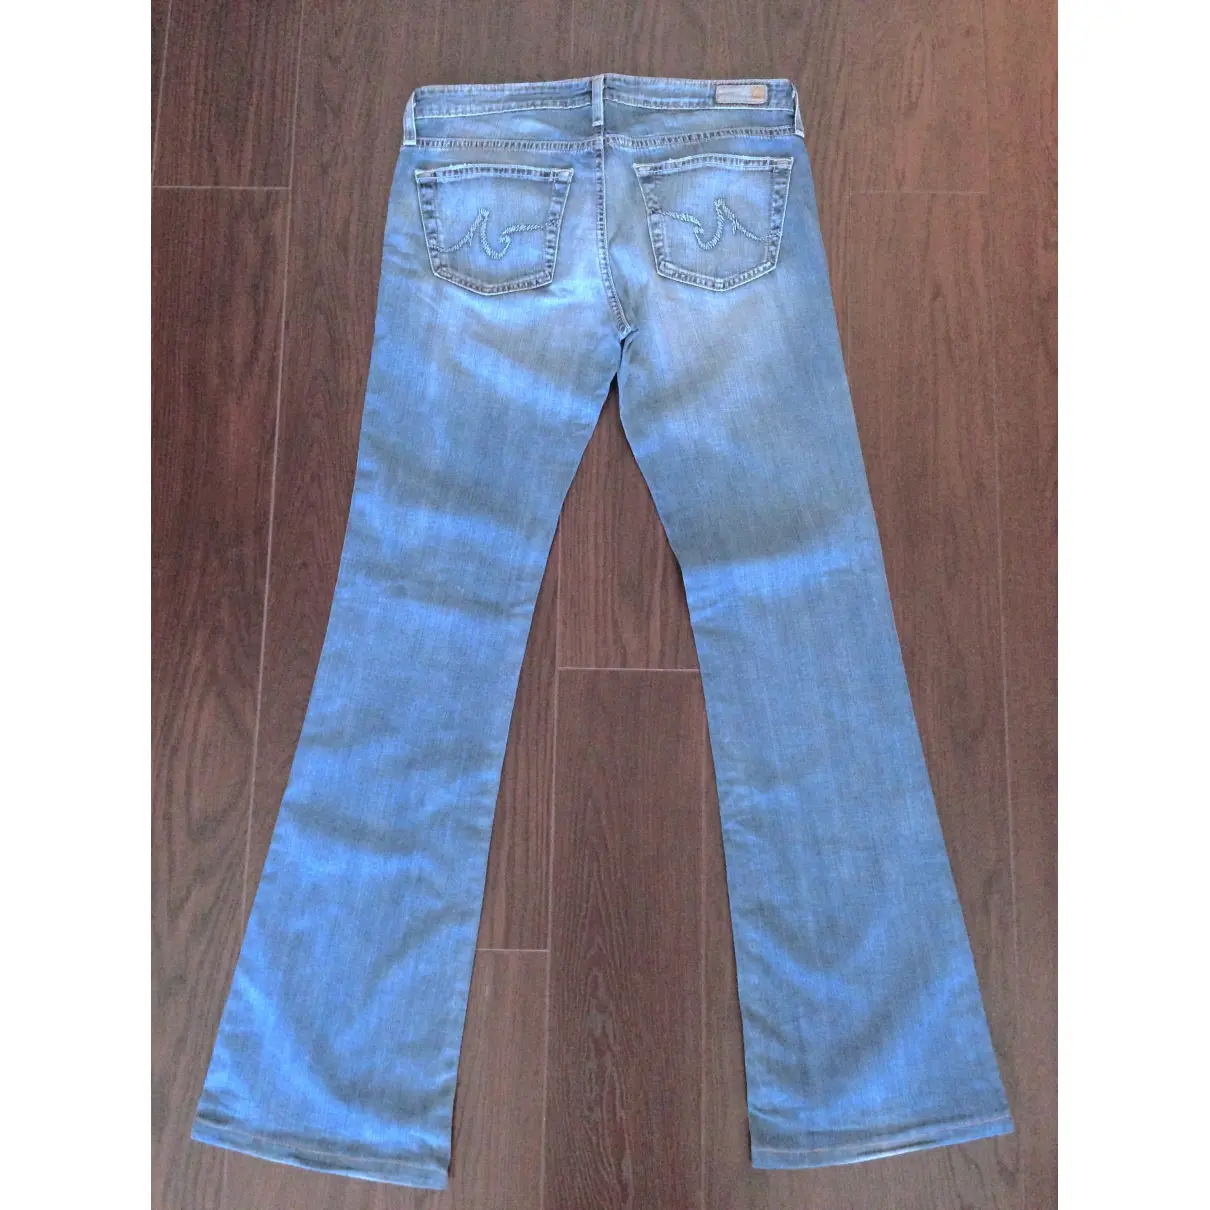 Ag Adriano Goldschmied Bootcut jeans for sale